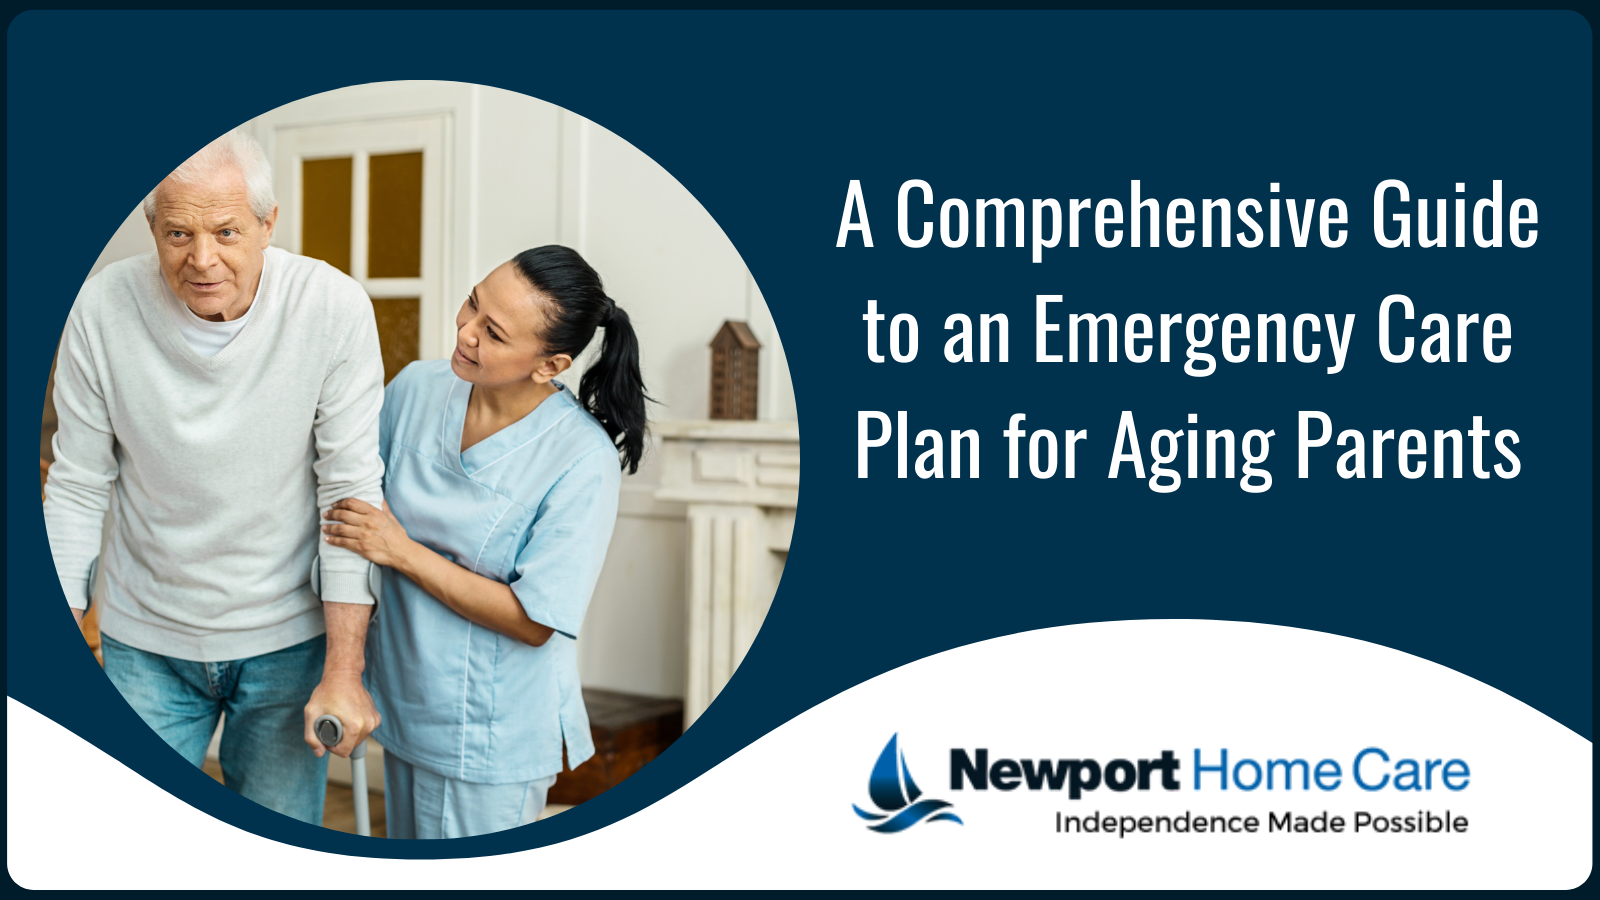 A Comprehensive Guide to an Emergency Care Plan for Aging Parents